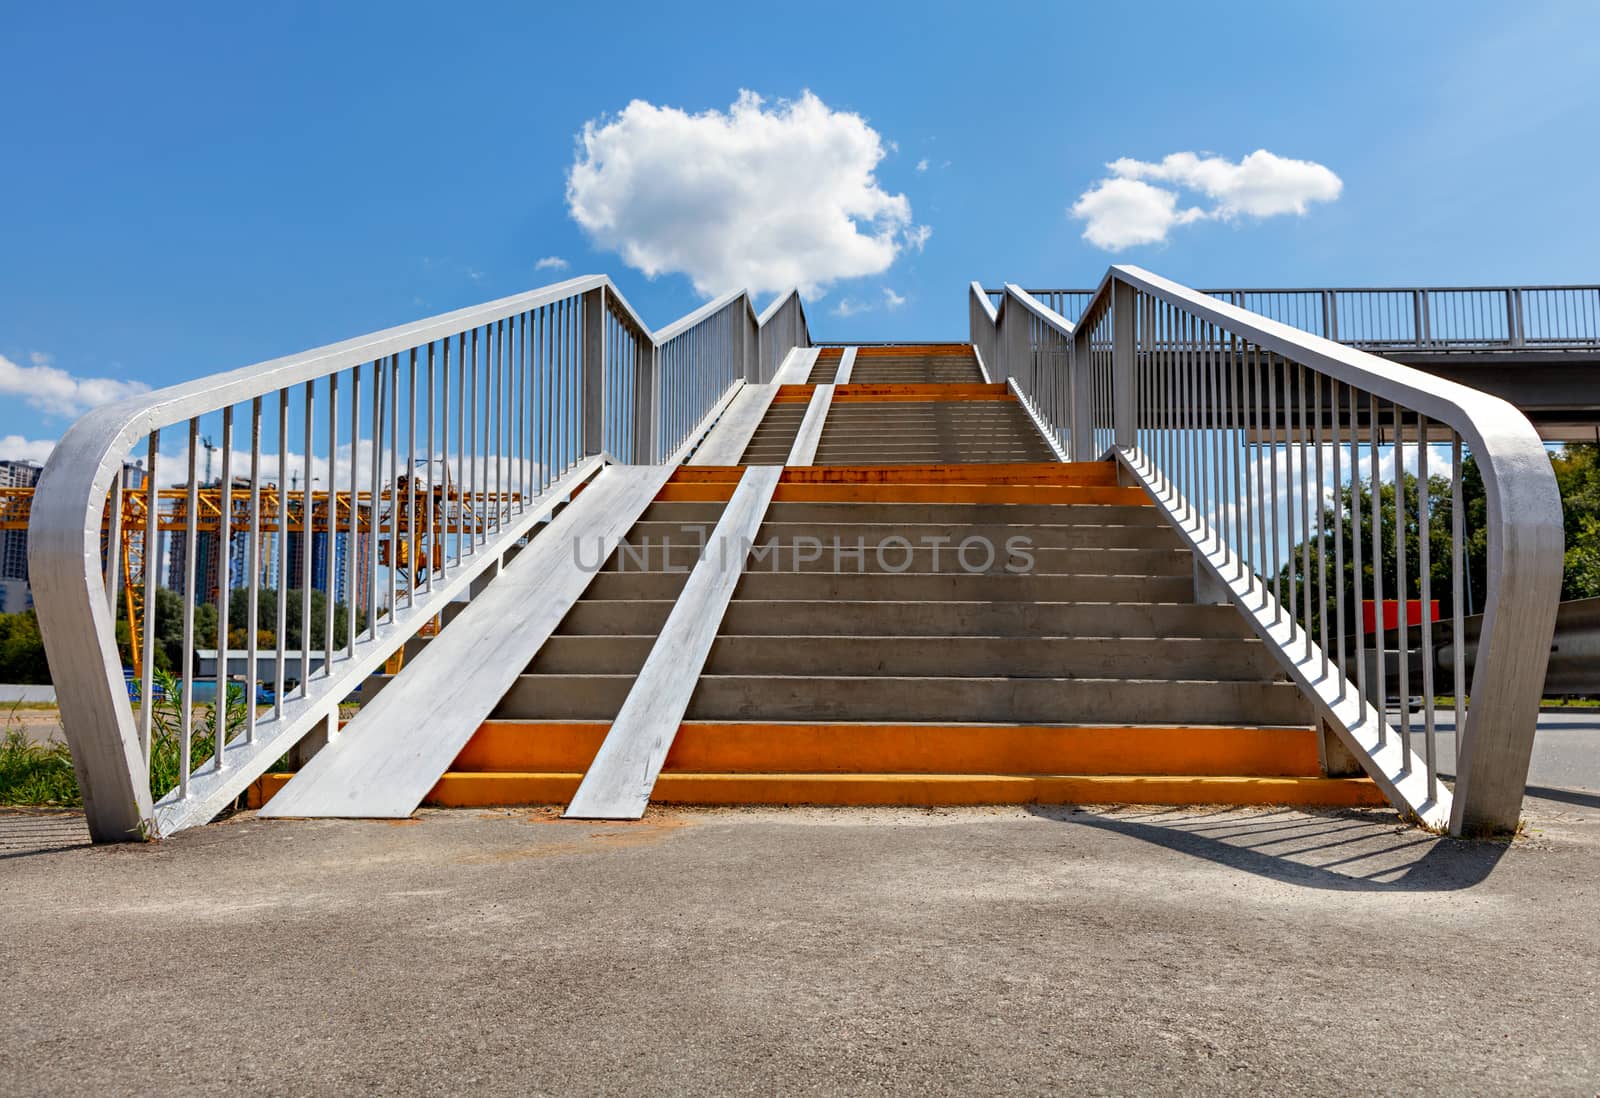 Wide entrance angle of a pedestrian crossing staircase over a highway against a background of blue sky and white clouds, low angle view, copy space.